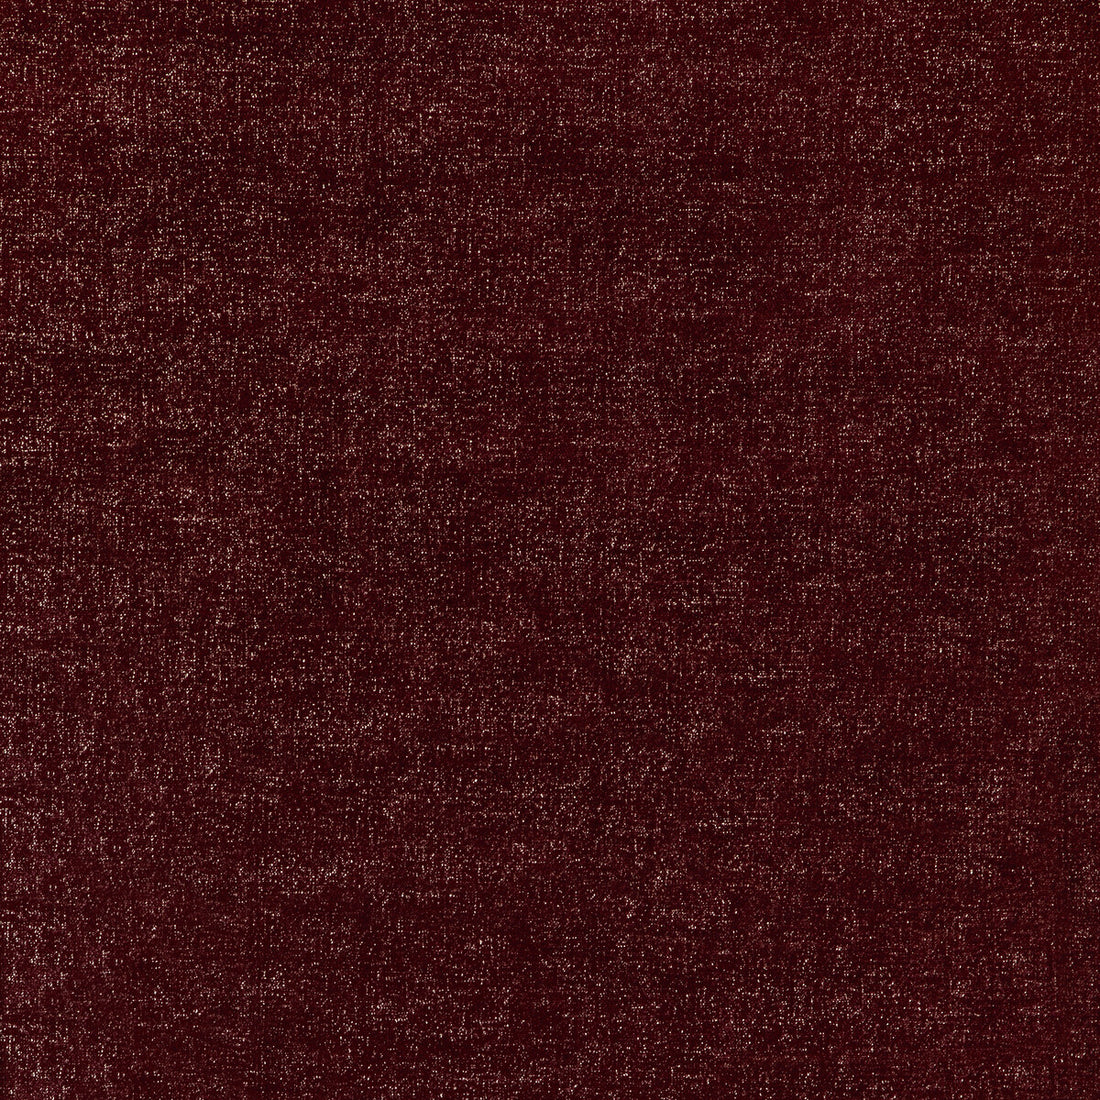 Night Fever fabric in sangria color - pattern 37281.77.0 - by Kravet Contract in the Happy Hour collection